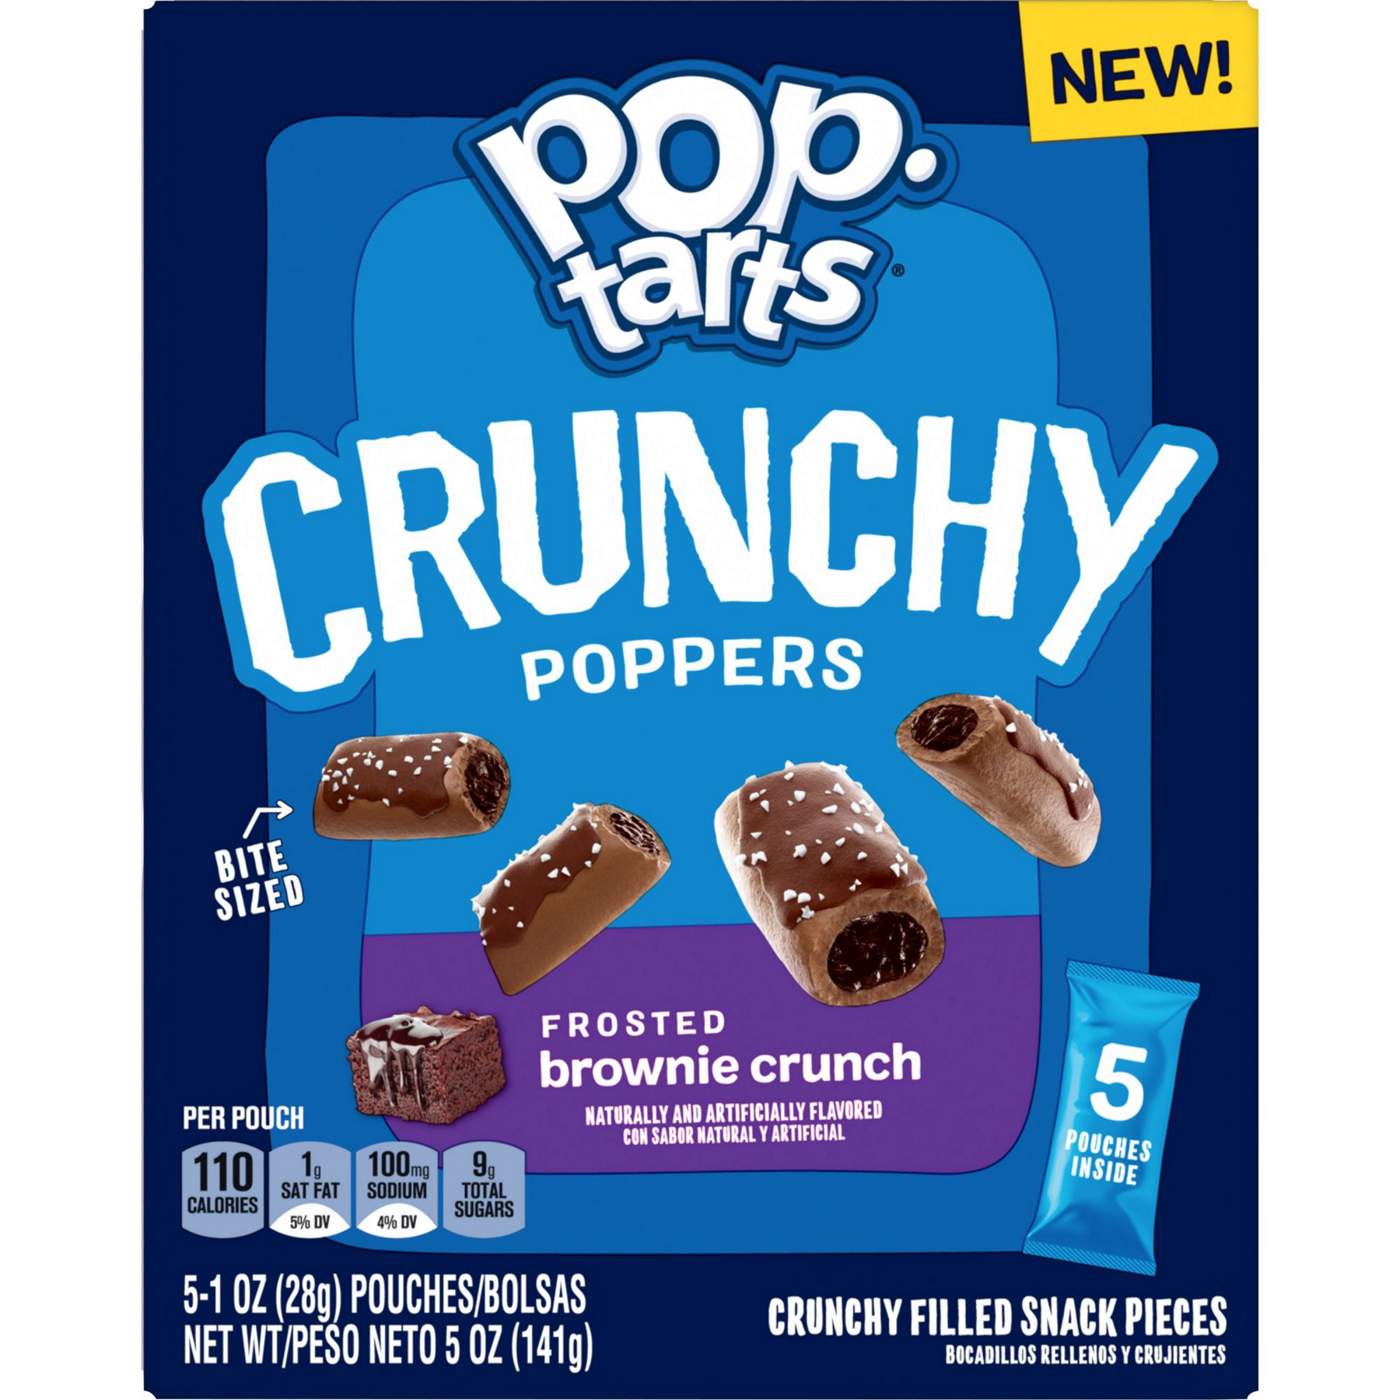 Pop-Tarts Crunchy Poppers Frosted Brownie Crunch Crunchy Filled Snack Pieces; image 1 of 6